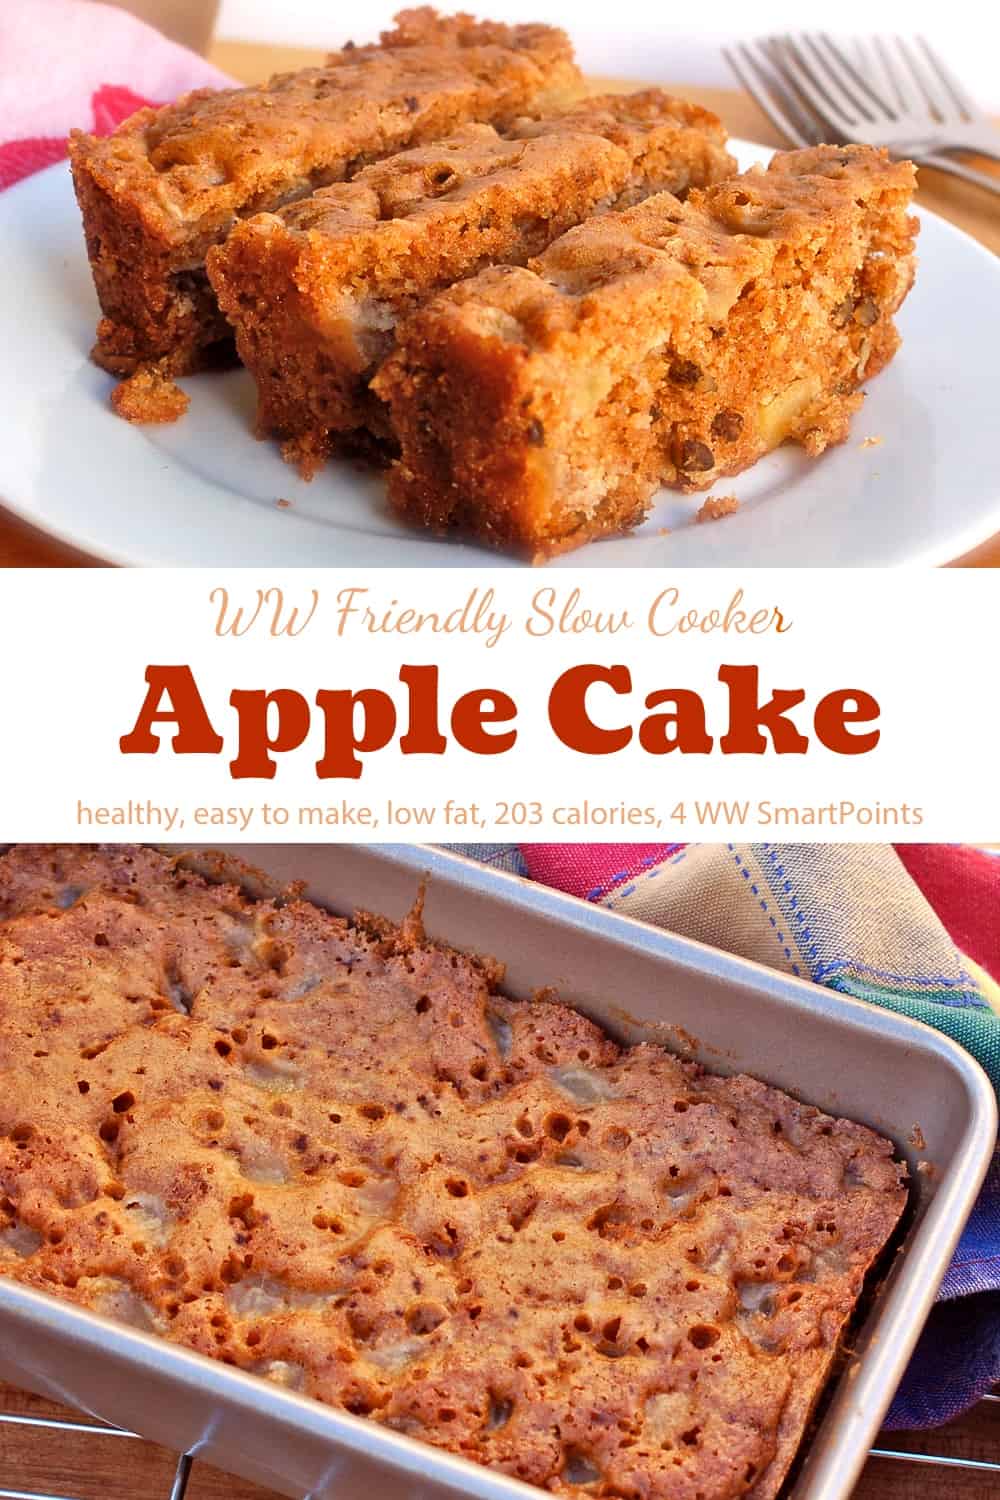 Three slices of slow cooker apple cake on white plate near baking pan with apple cake.